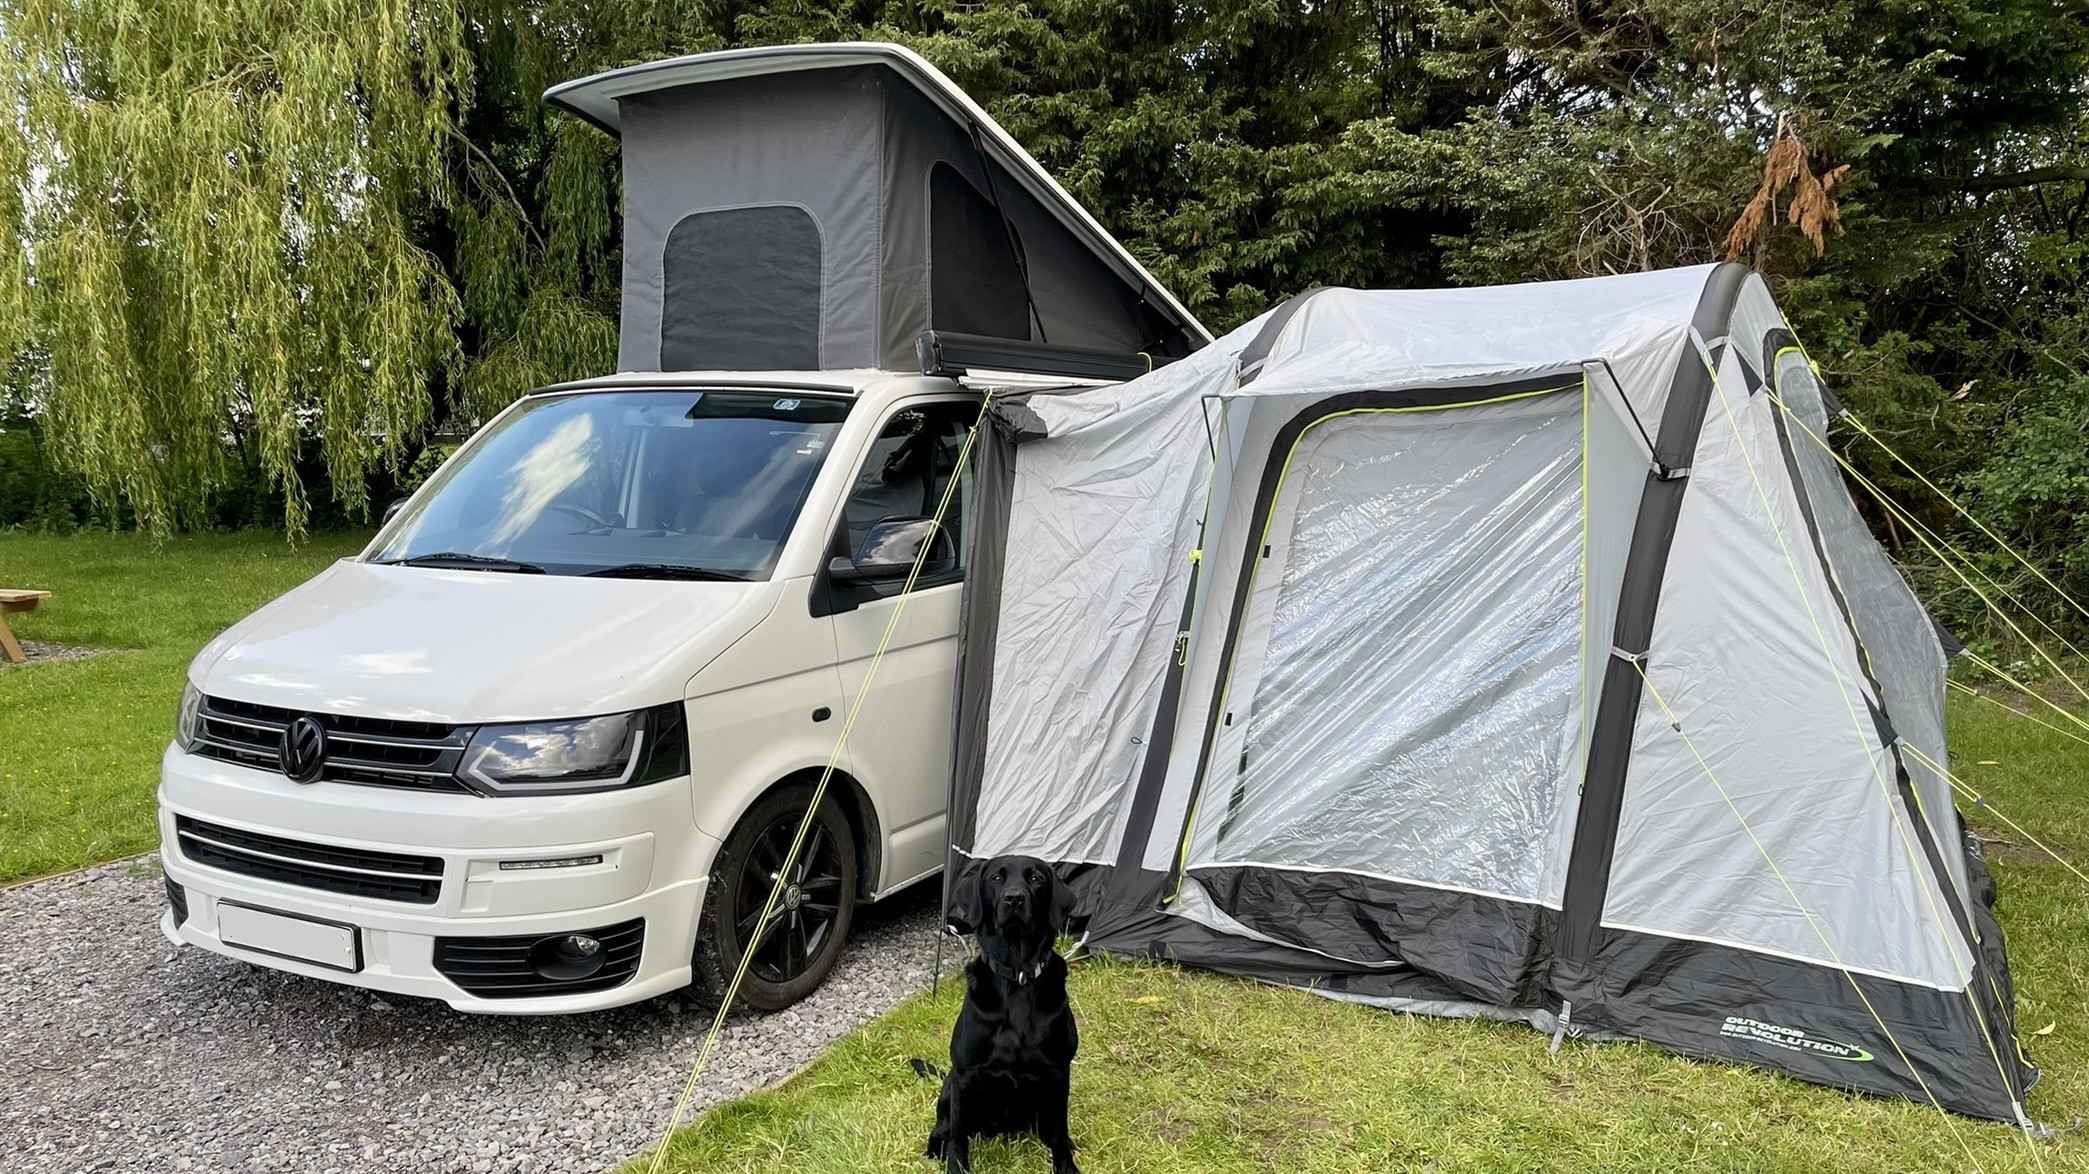 A VW T5 Campervan called Earle and for hire in Sandbach, England